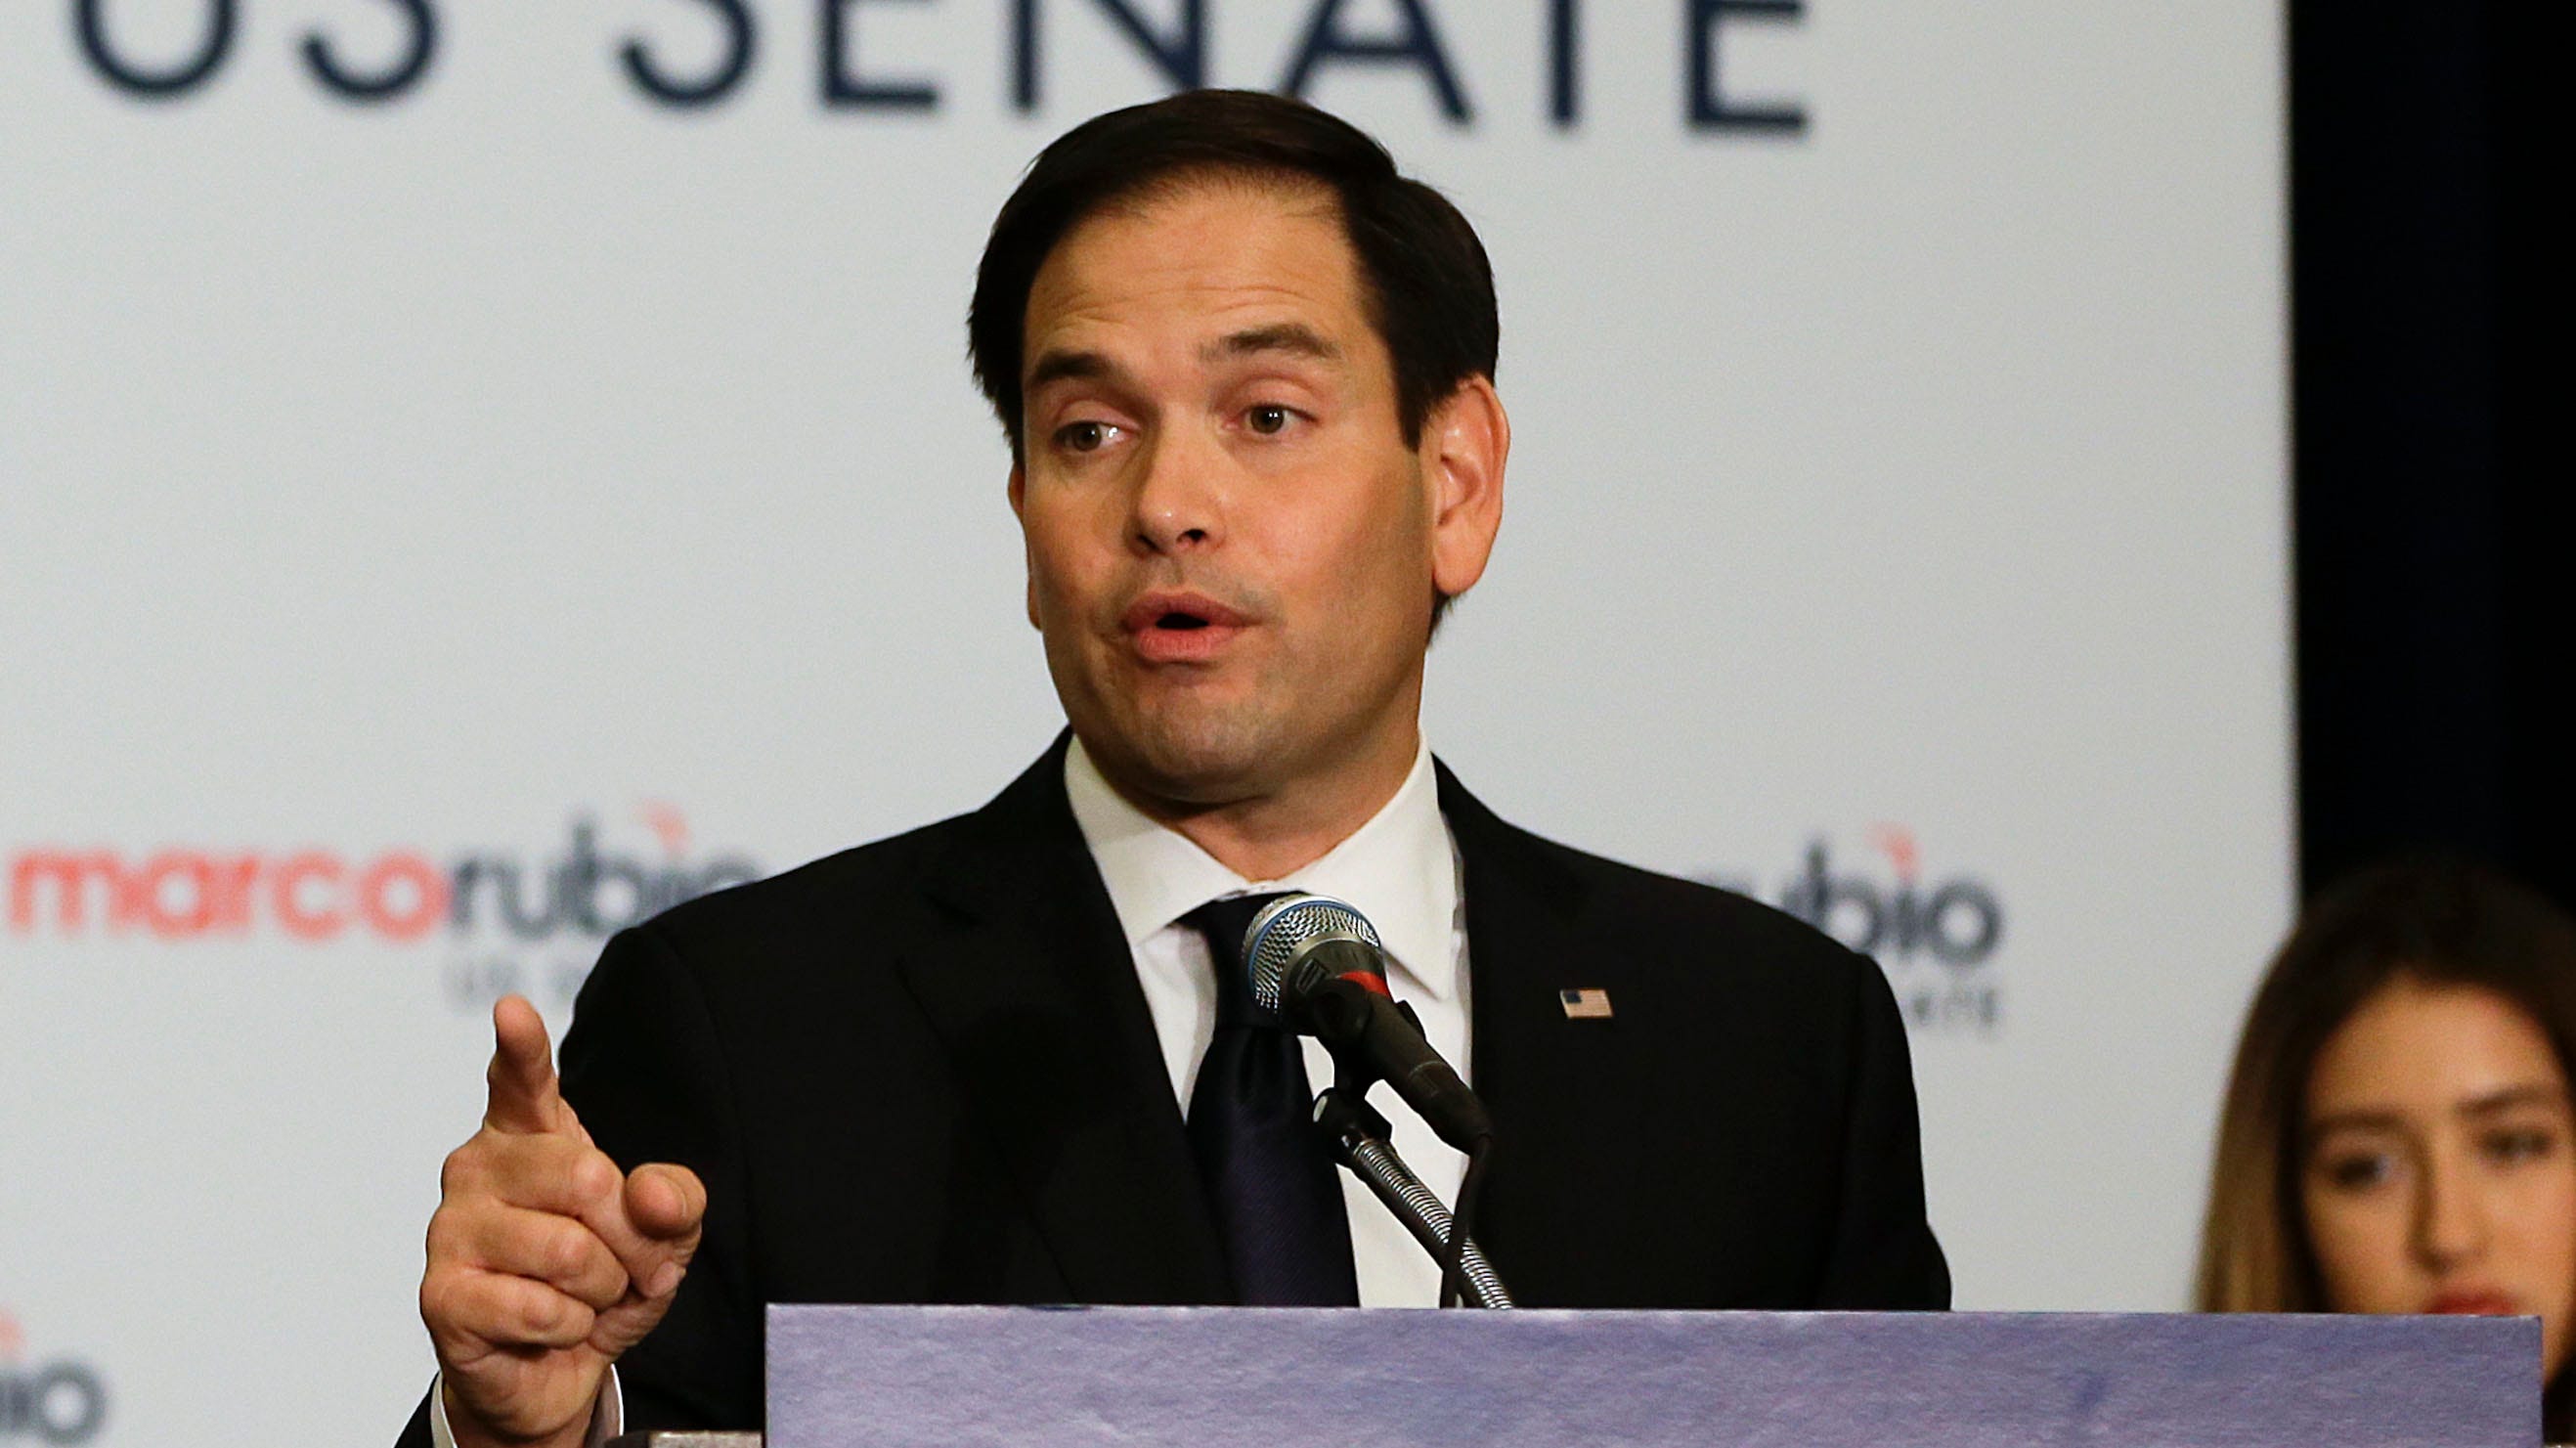 Marco Rubio easily wins Republican nomination to retain his seat in the Senate Fox News picture image image